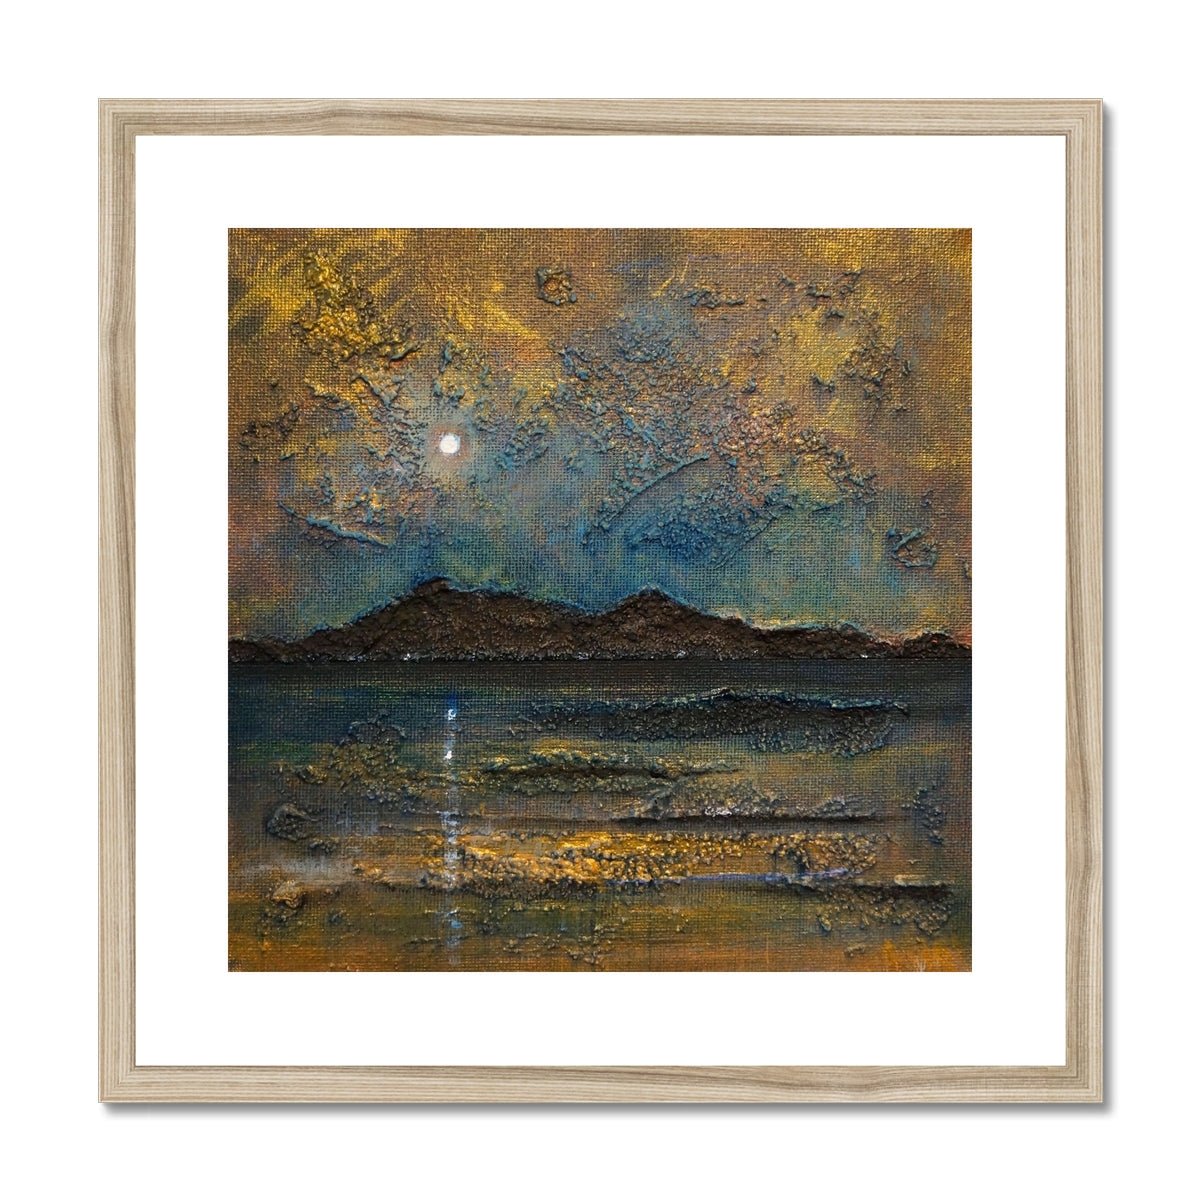 Arran Moonlight Painting | Framed & Mounted Prints From Scotland-Framed & Mounted Prints-Arran Art Gallery-20"x20"-Natural Frame-Paintings, Prints, Homeware, Art Gifts From Scotland By Scottish Artist Kevin Hunter